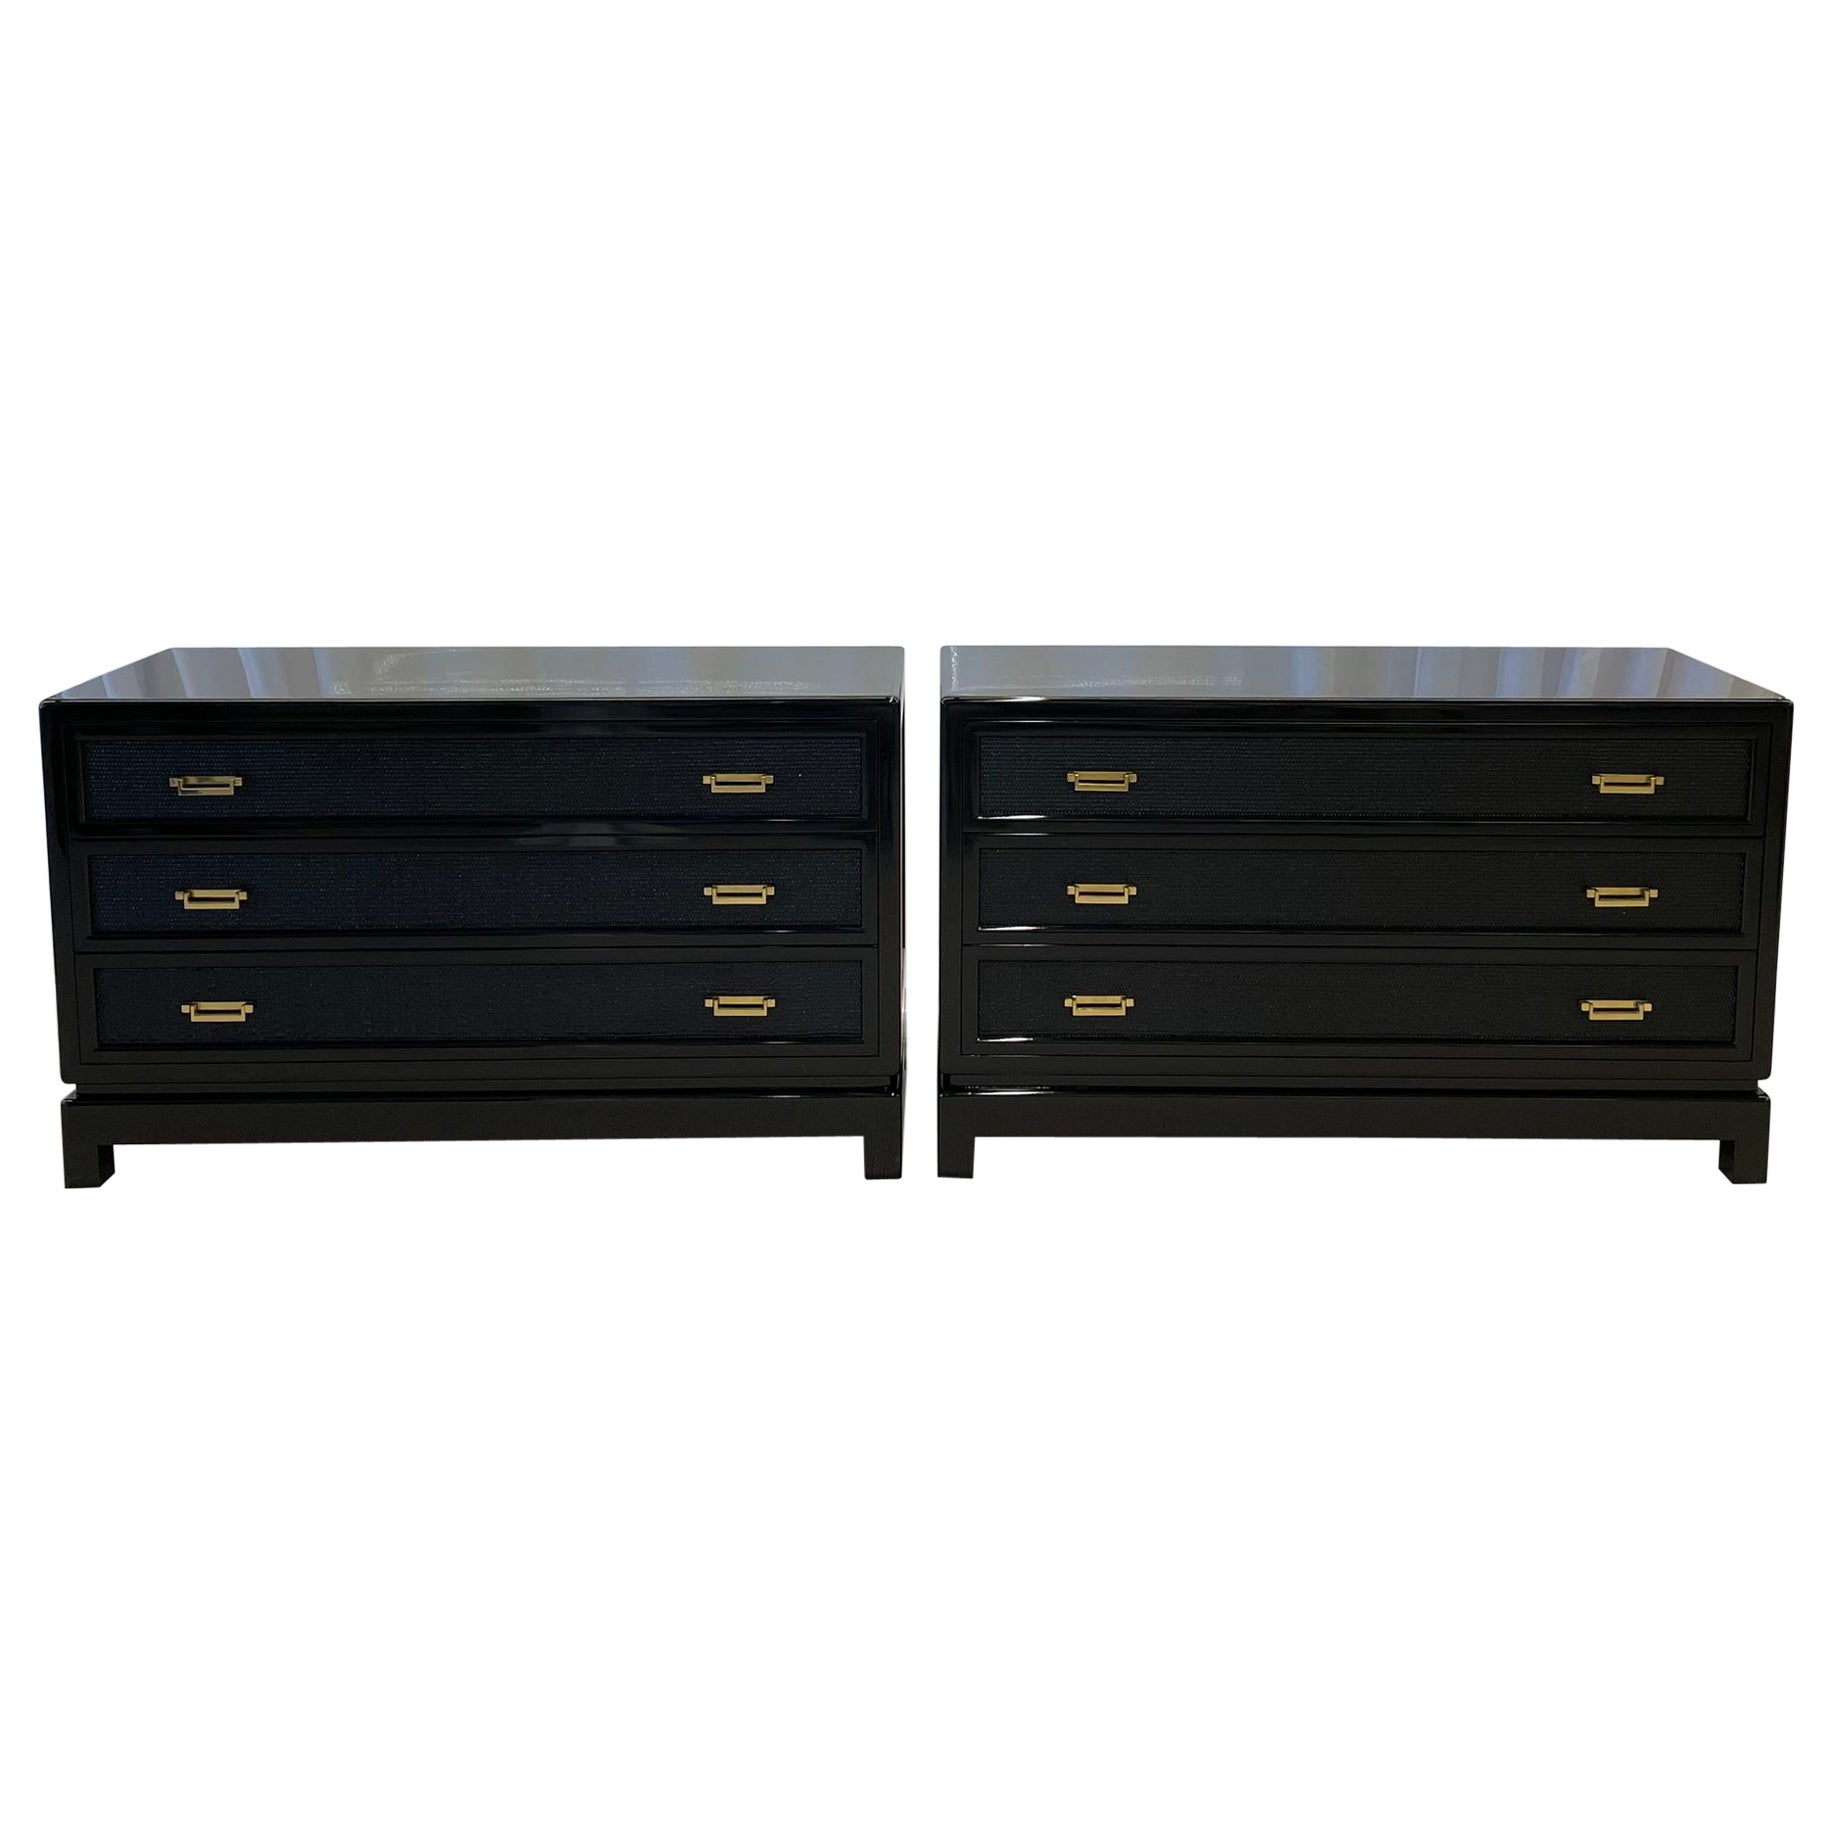 Pair of Mid-Century Modern Cabinets, Chests, Nightstands, Karl Springer Style